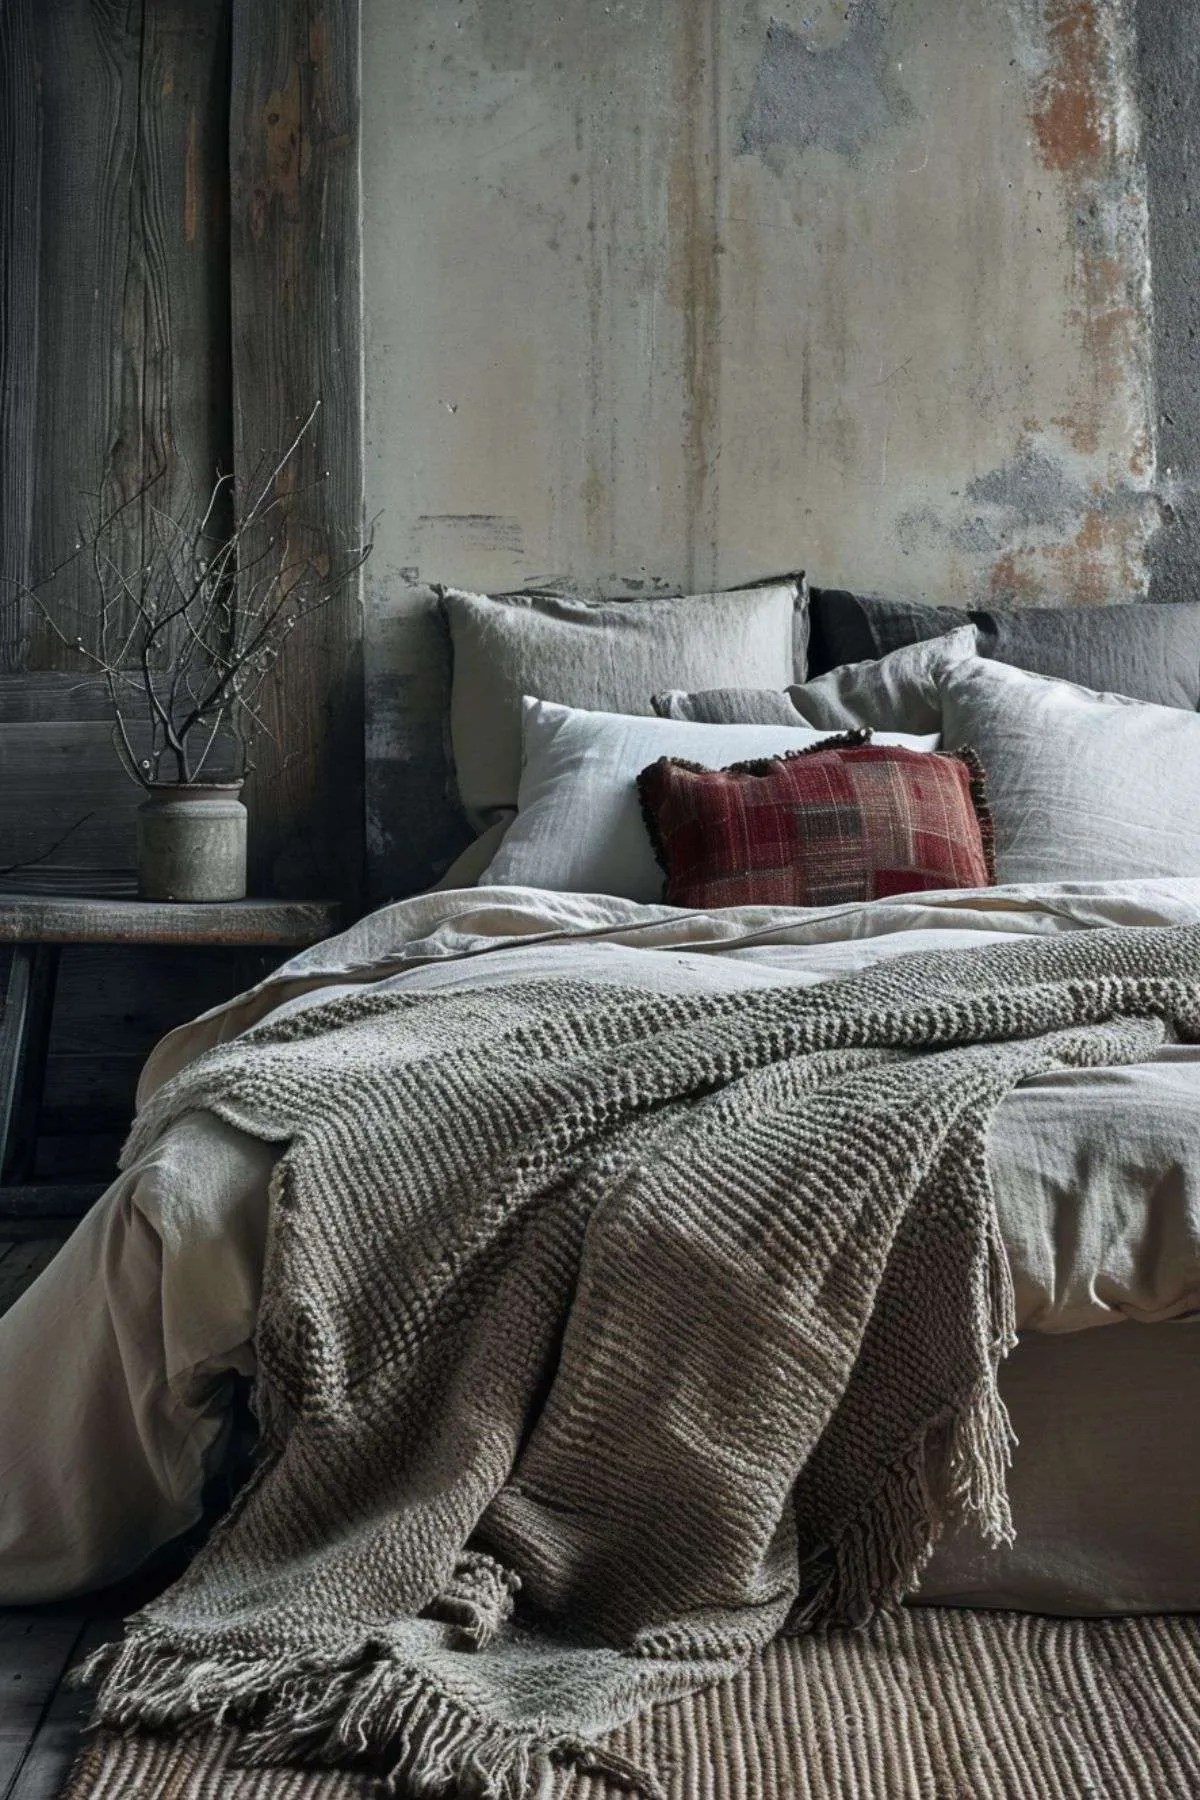 Bed Layering – 7 Tips on How to Layer and Style the Perfect Bed